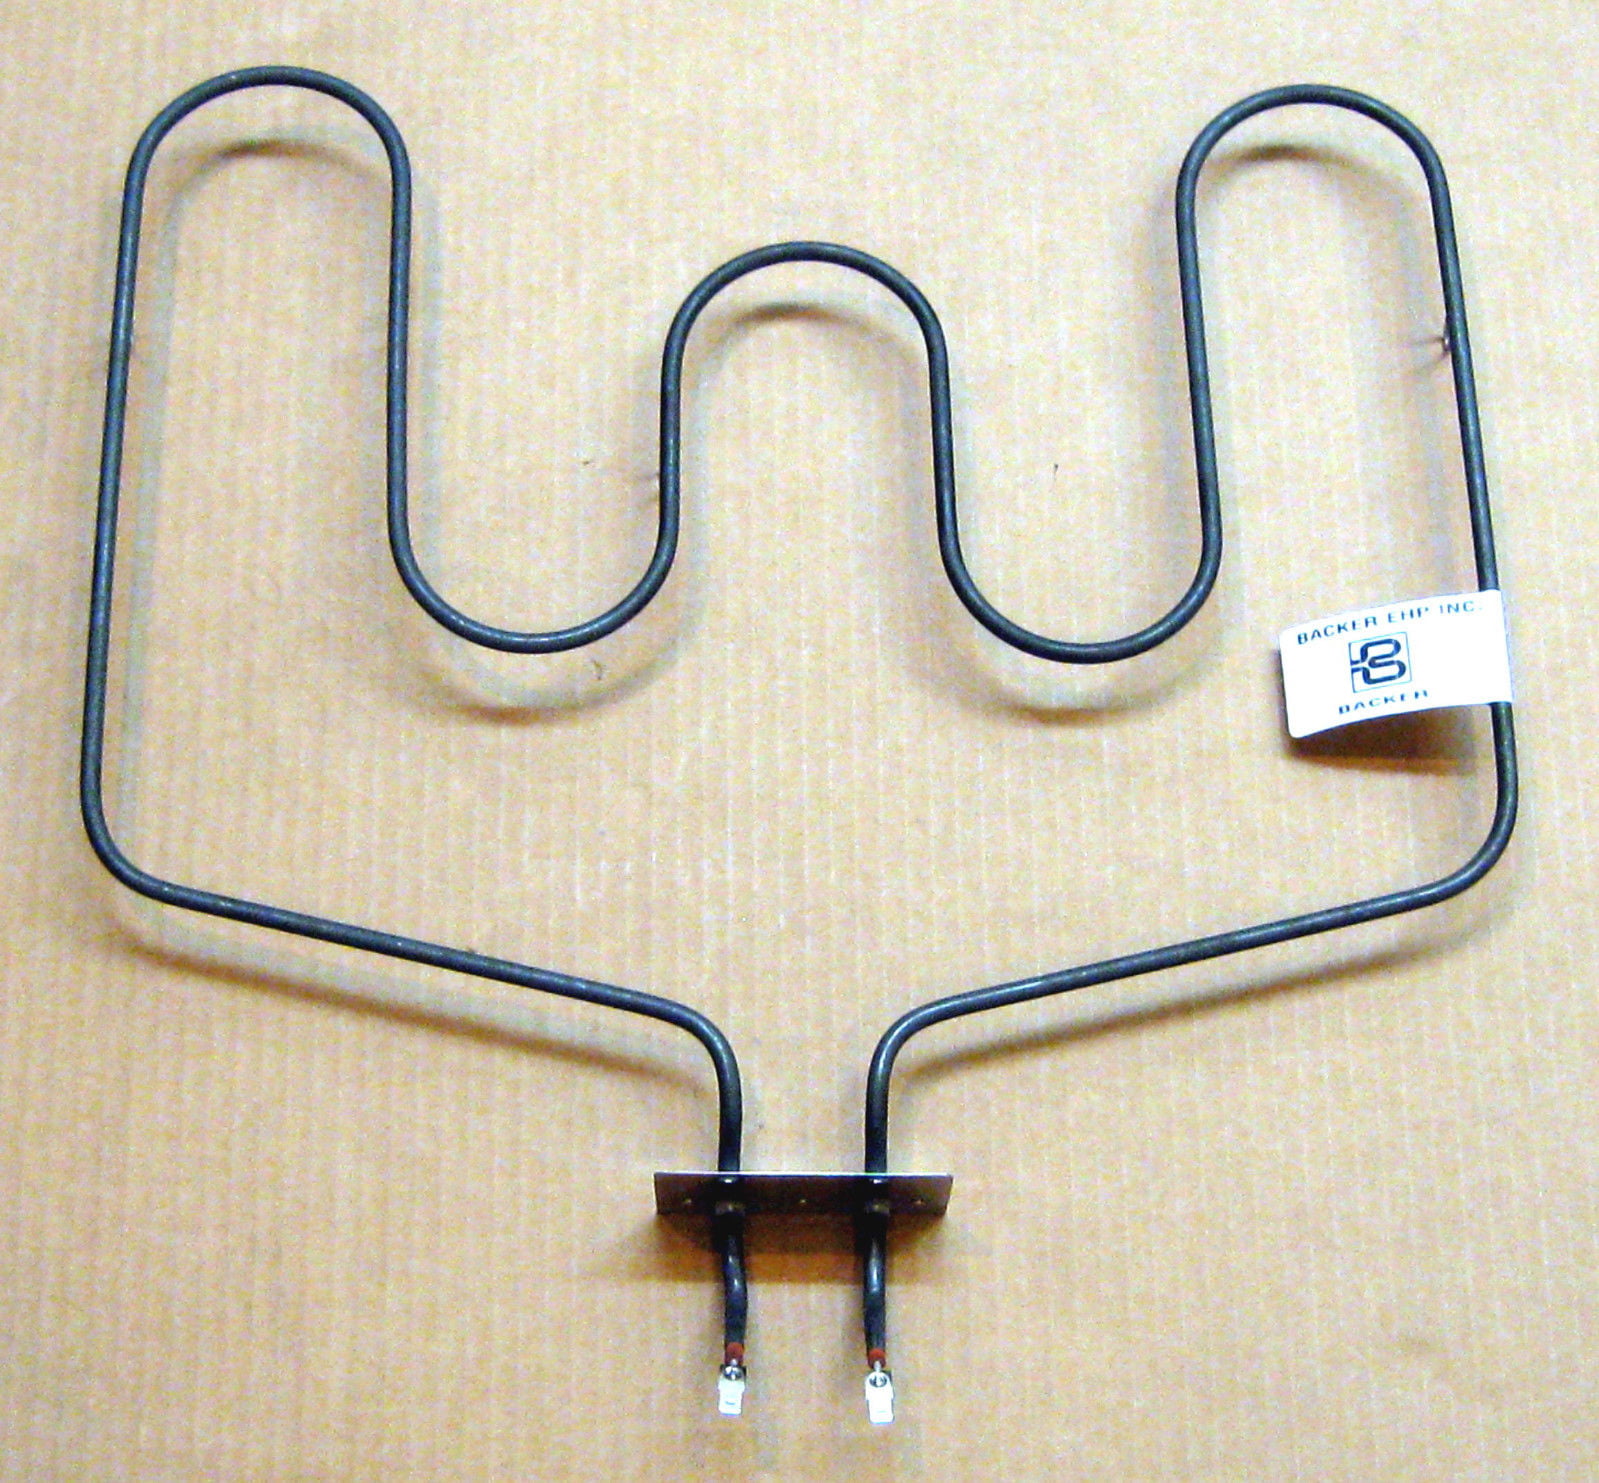 WB44K5012 for GE Electric Range Oven Bake Unit Lower Heating Element PS249247 